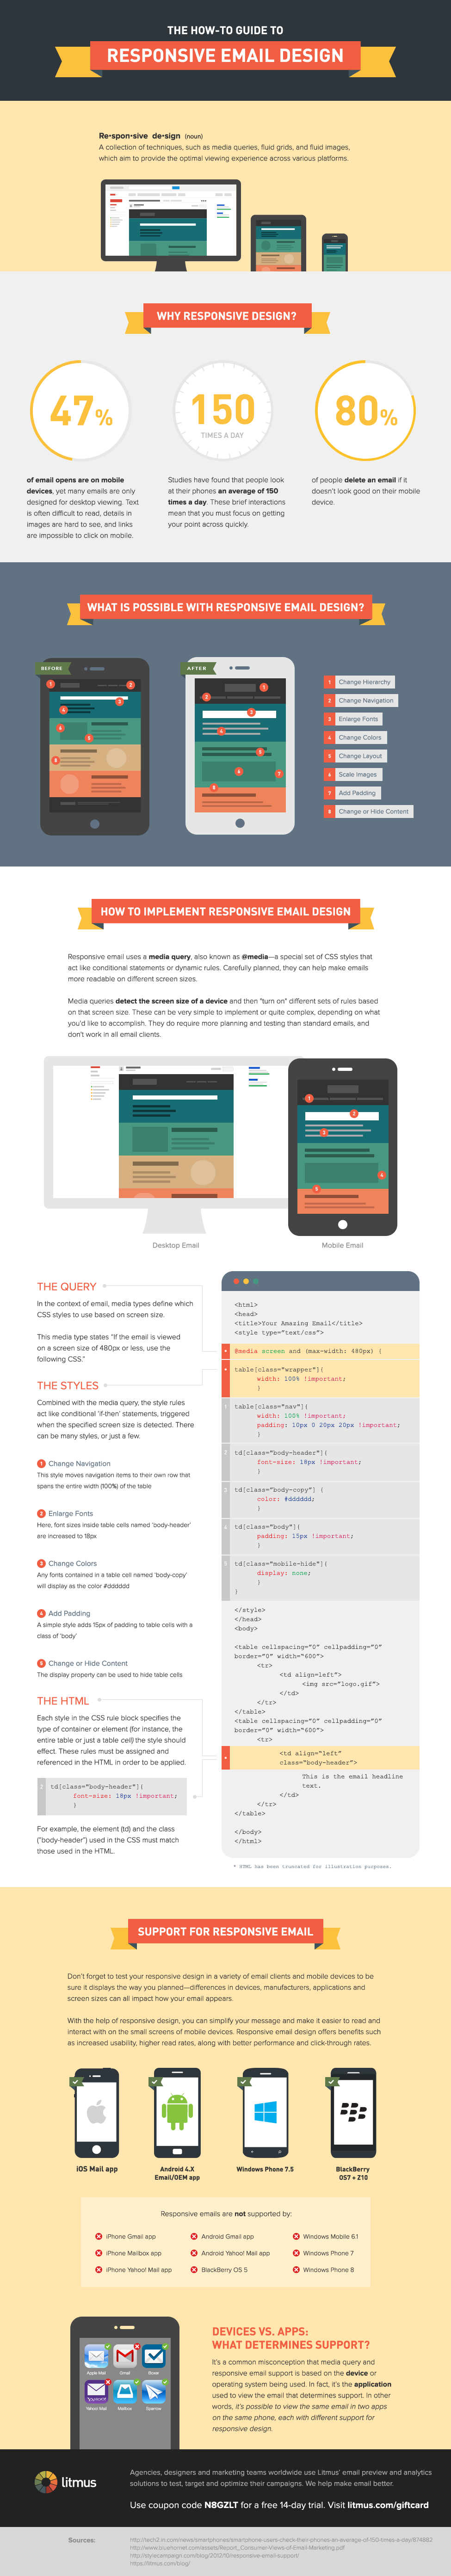 The How-To Guide to Responsive Email Design